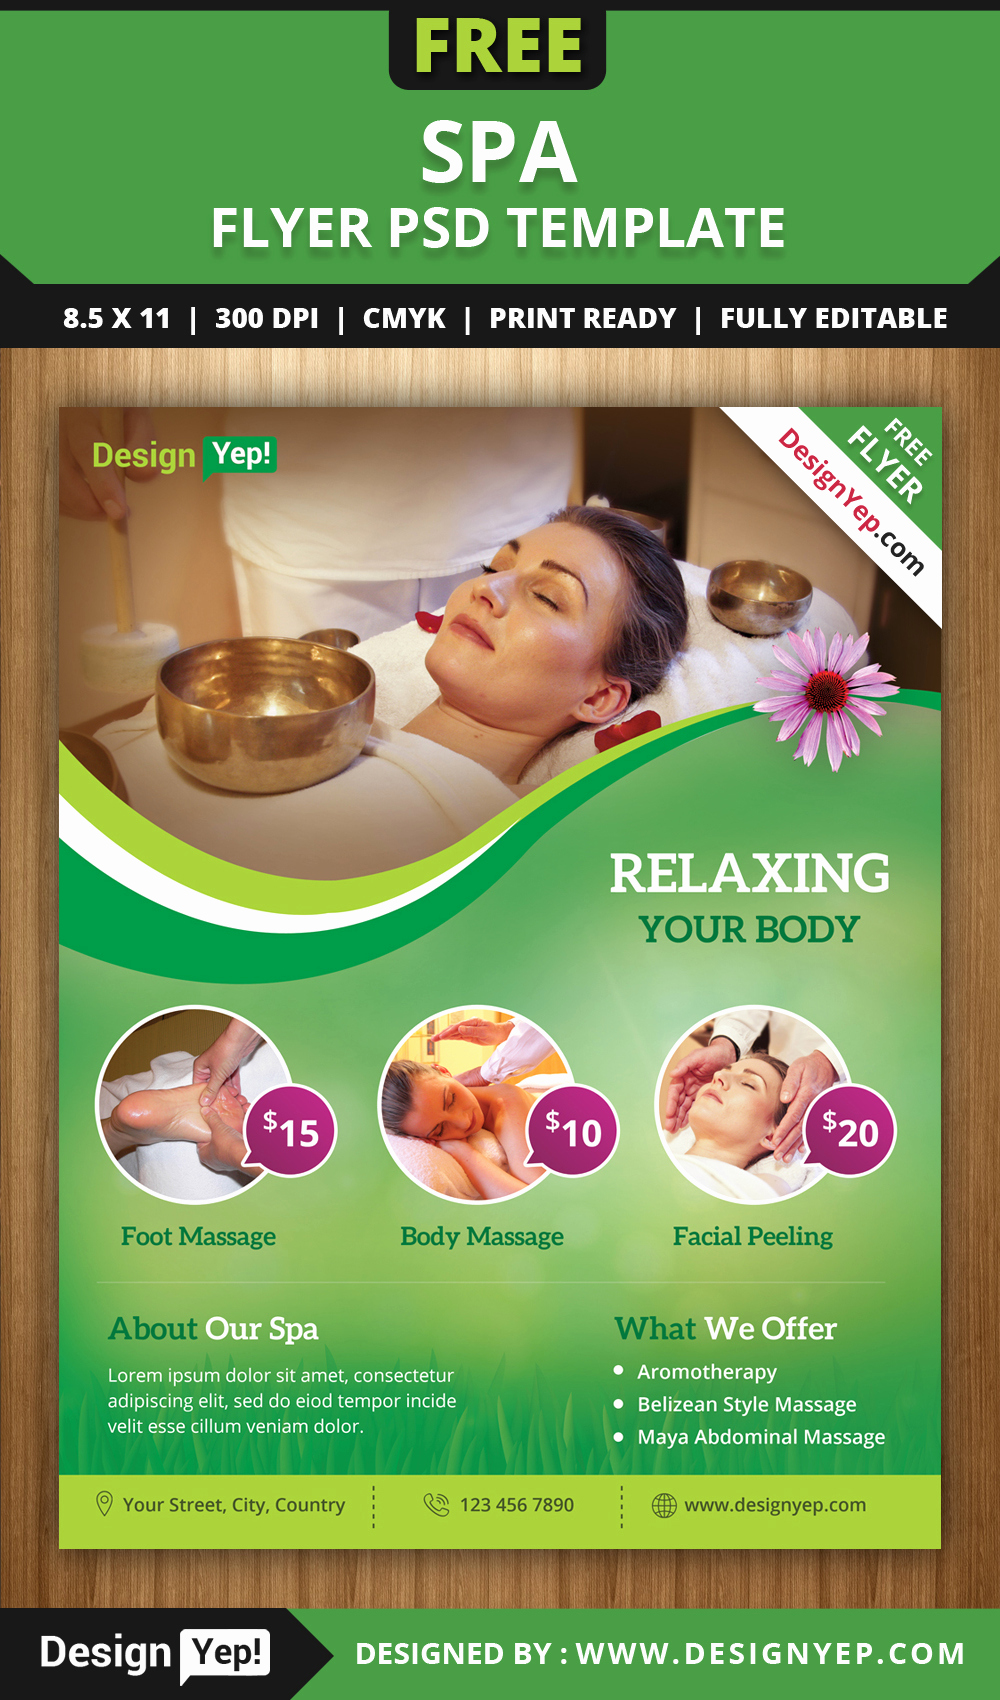 Free Download Flyer Templates Inspirational Free Spa Flyer Psd Template for Download Designyep